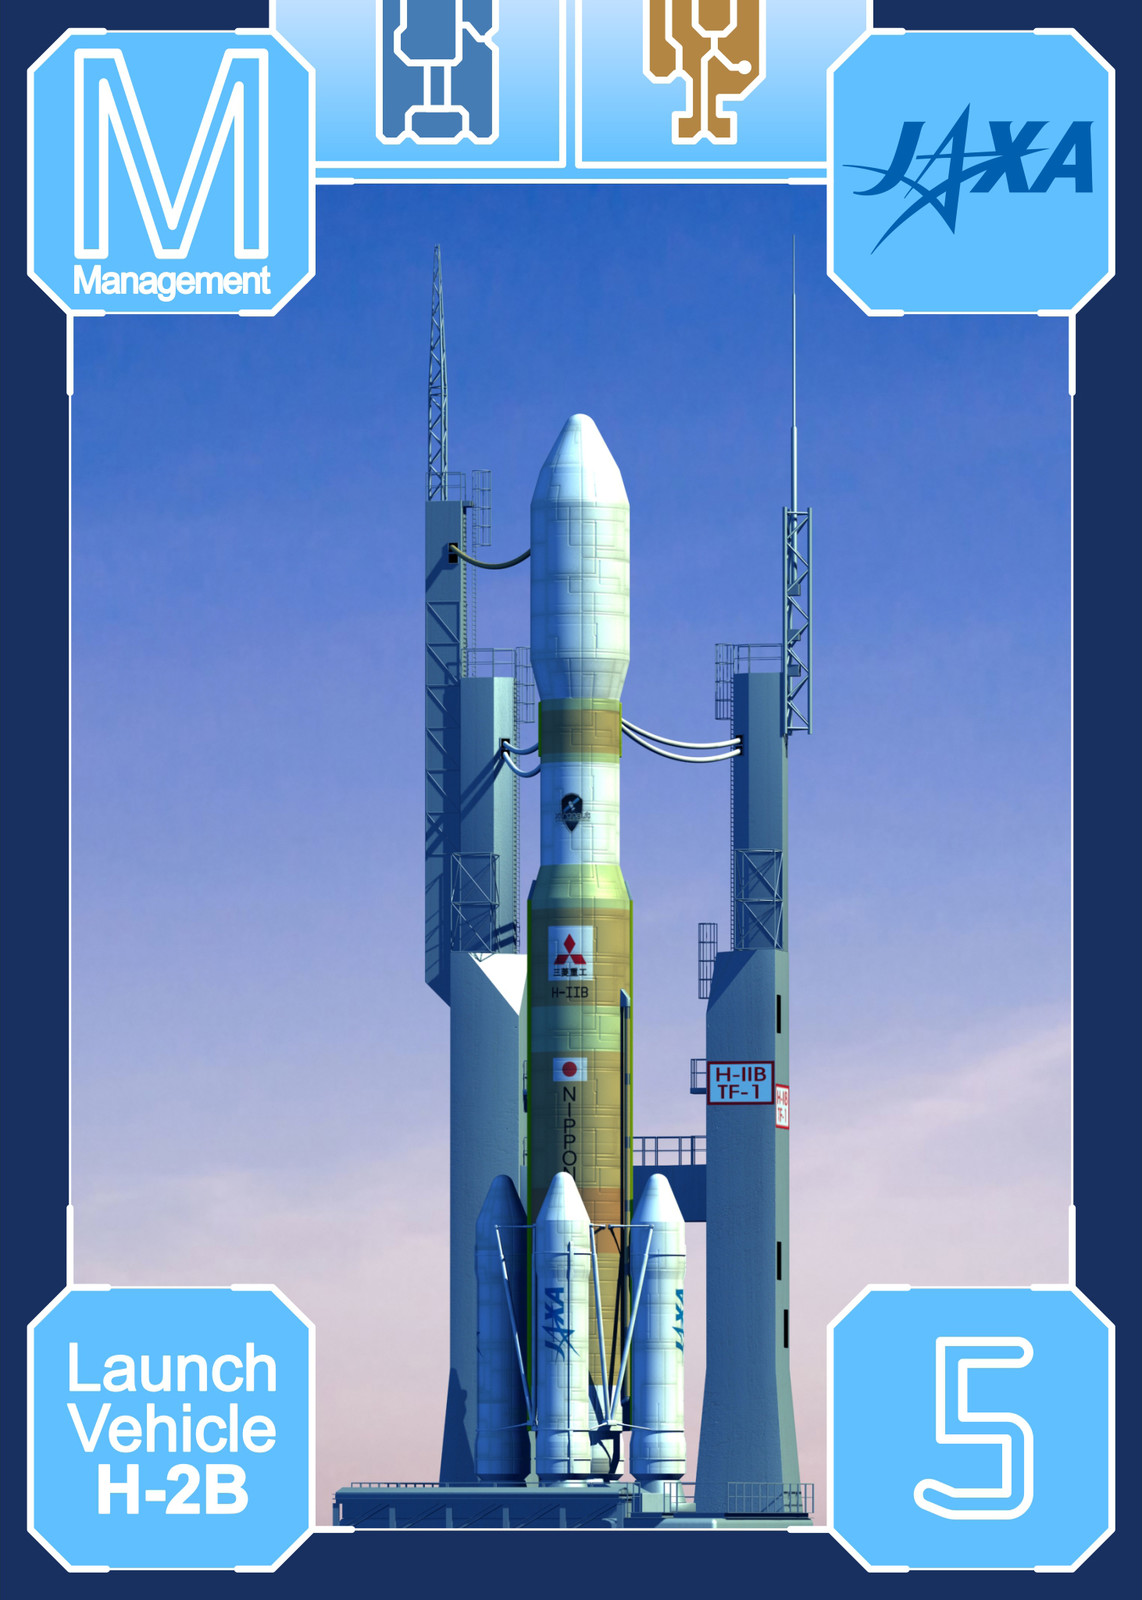 H-2B rocket playing card complete (illustration + graphic design).